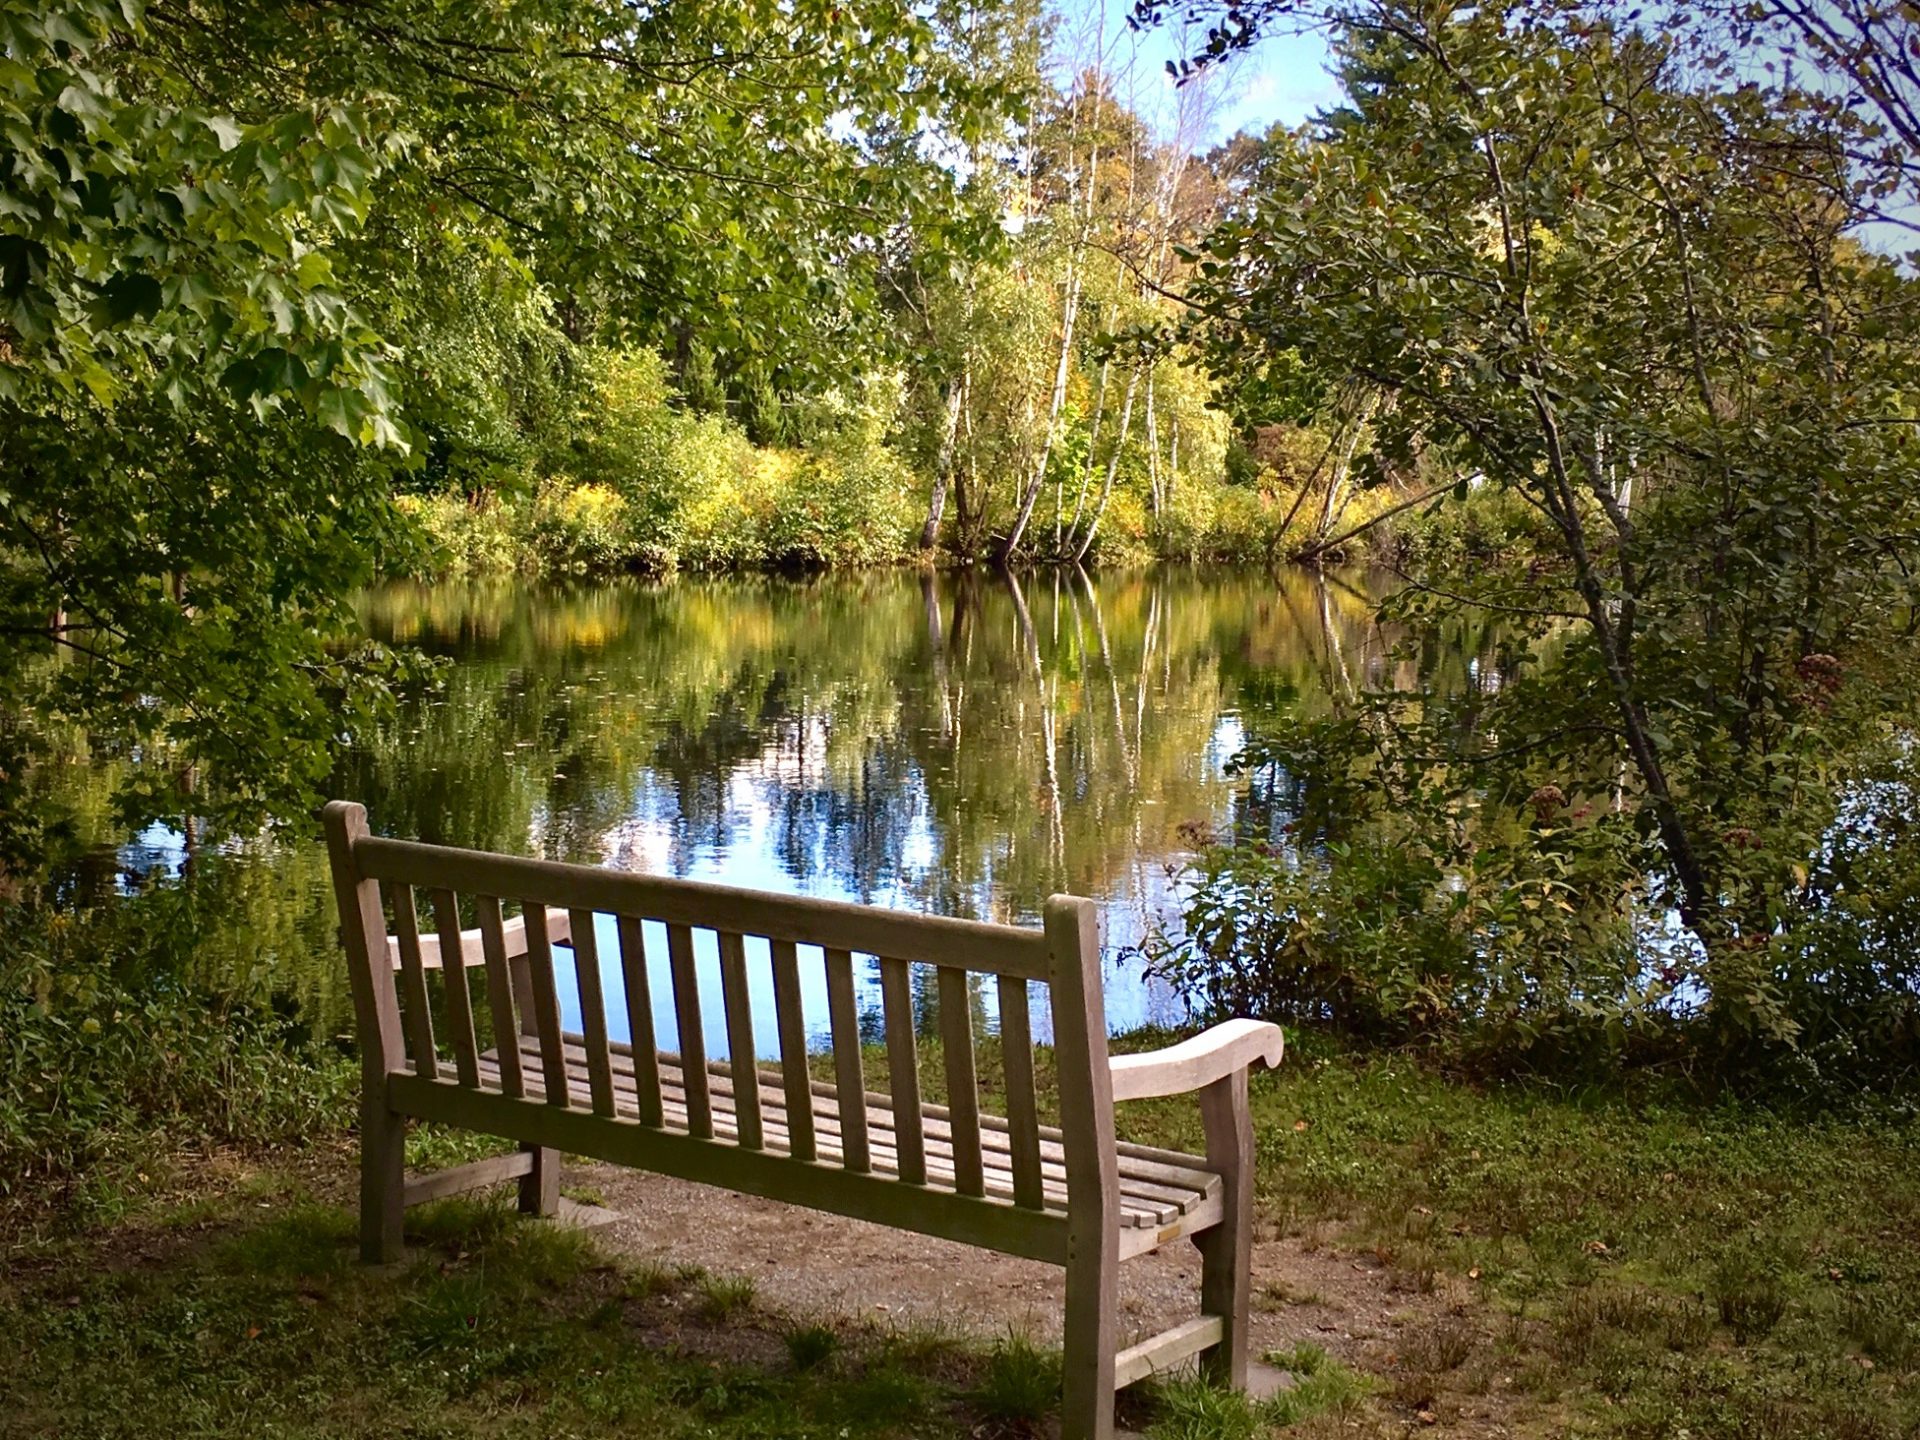 Fuller Brook Park, State Street Pond, early fall 2019